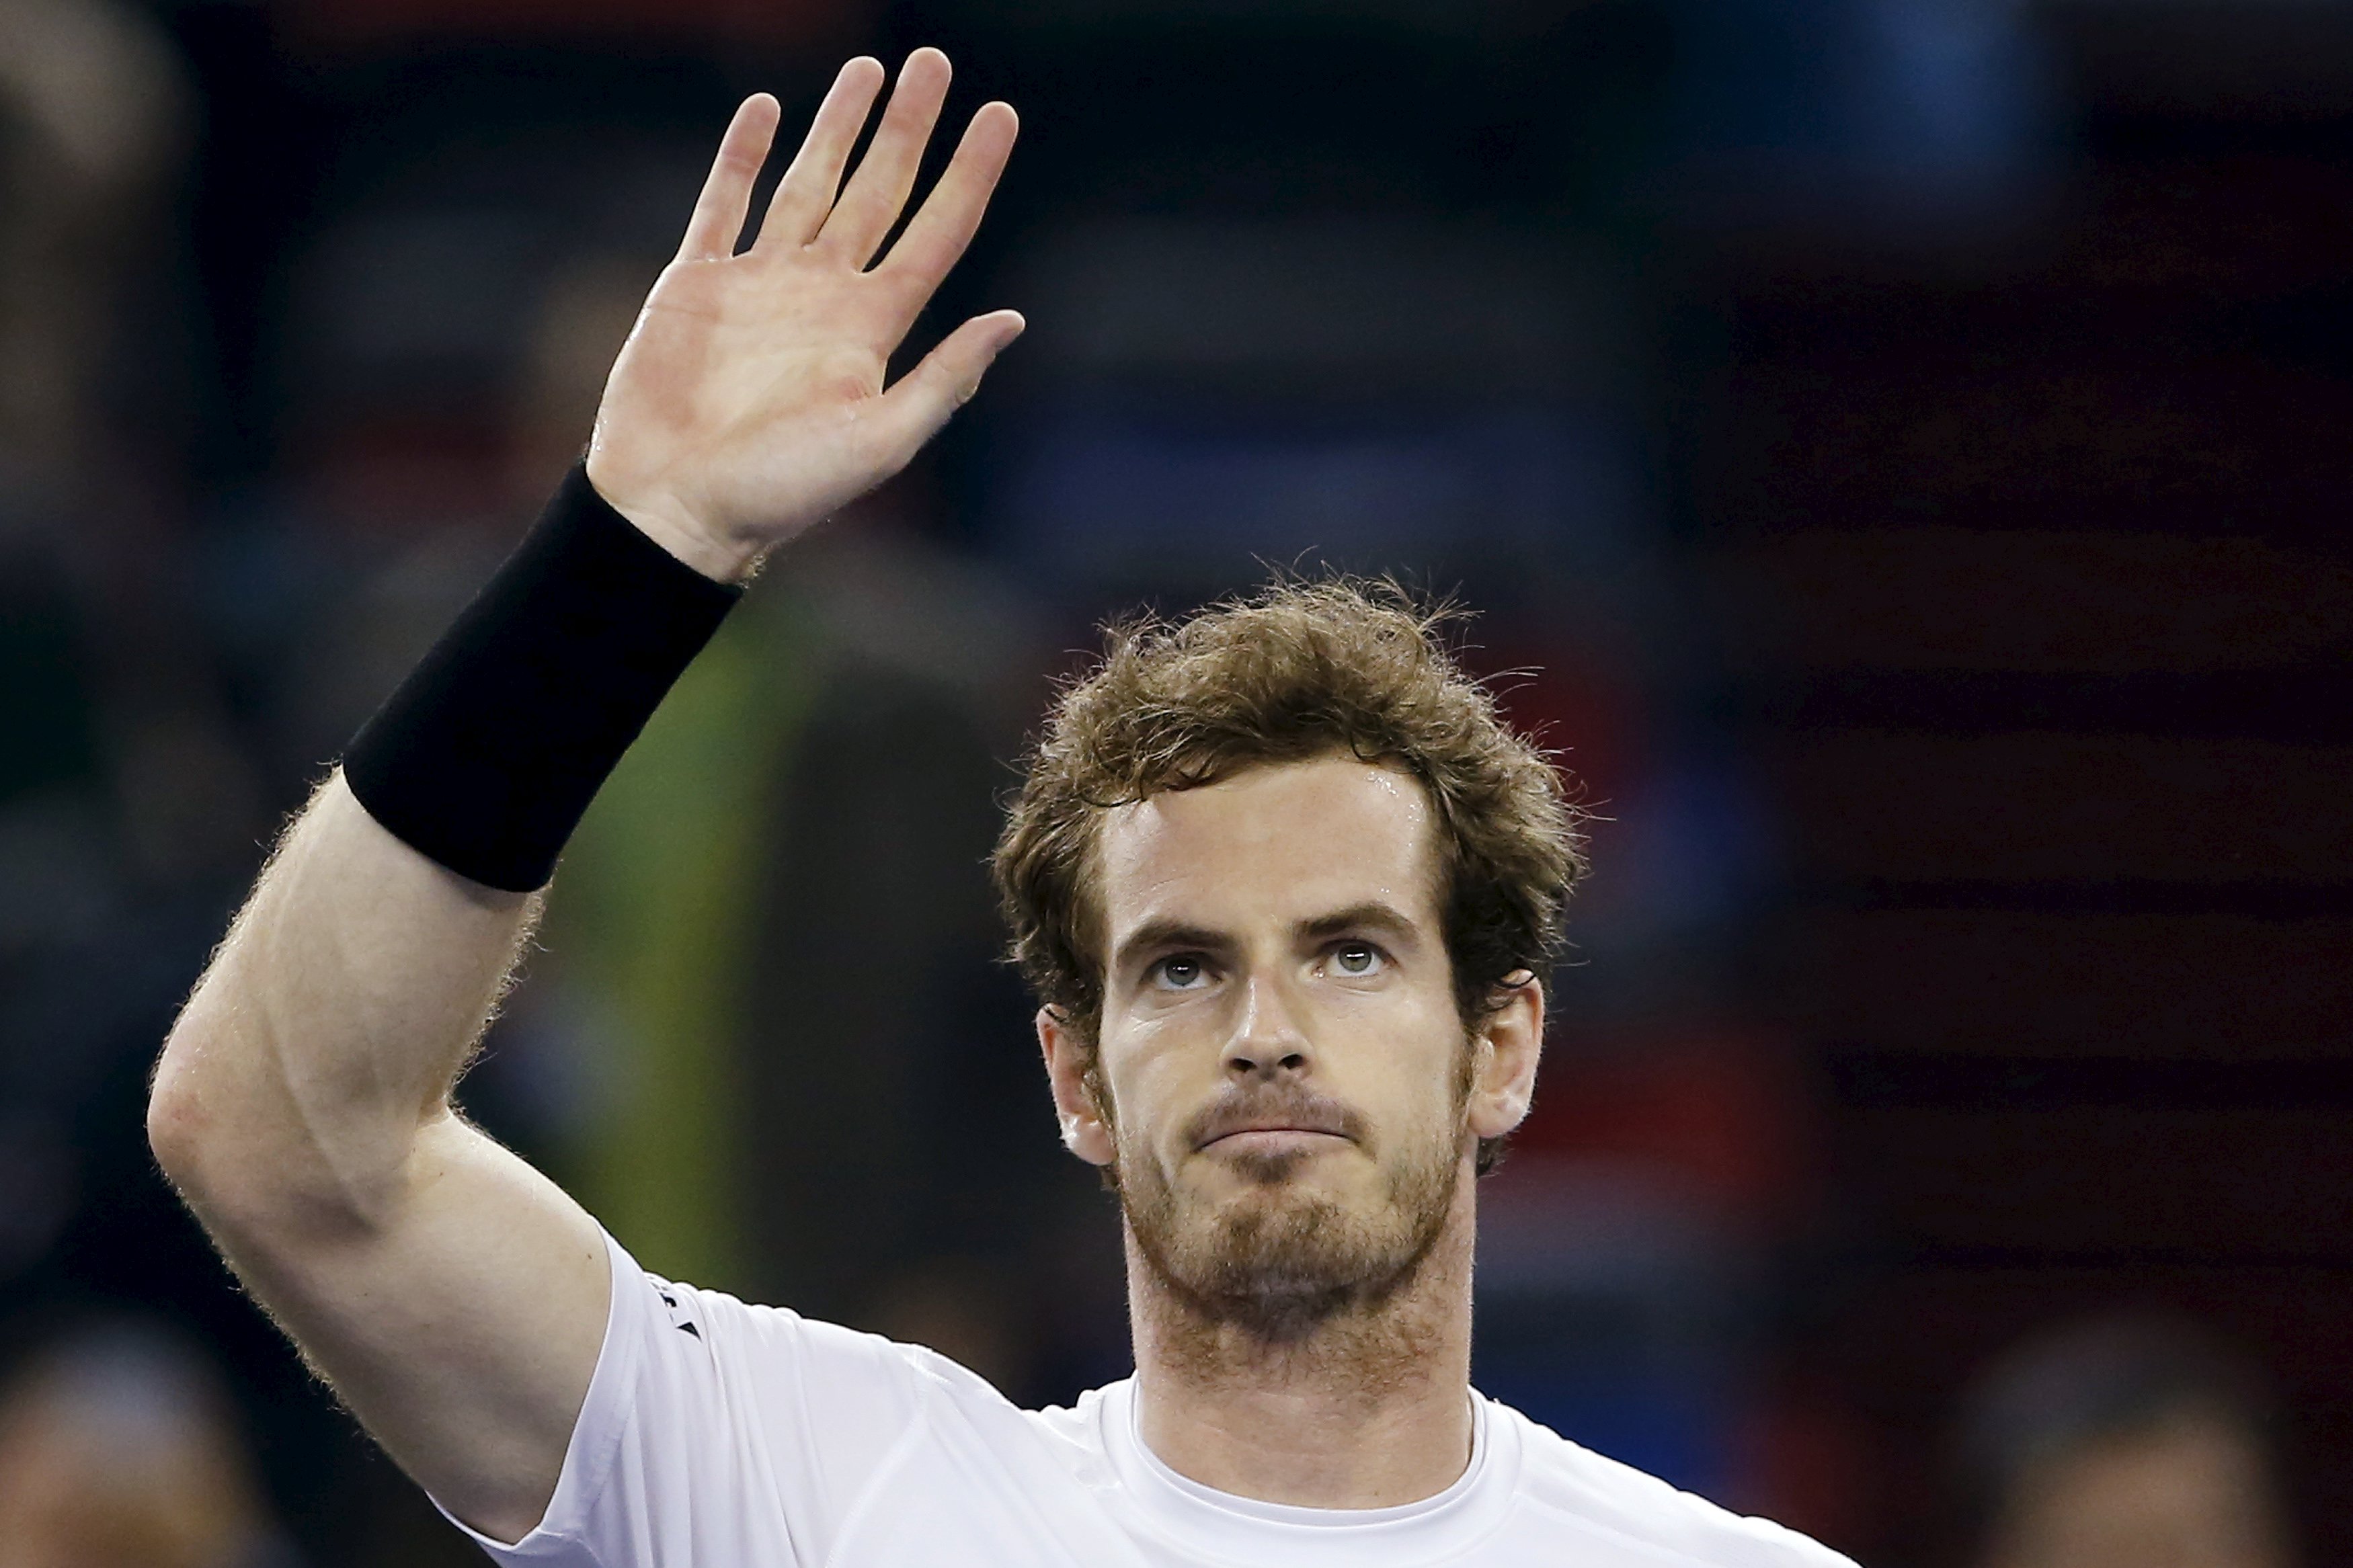 Andy Murray of Britain celebrates after winning his men's singles quarter-final match against Tomas Berdych of Czech Republic at the Shanghai Masters tennis tournament in Shanghai, China, October 16, 2015. REUTERS/Aly Song